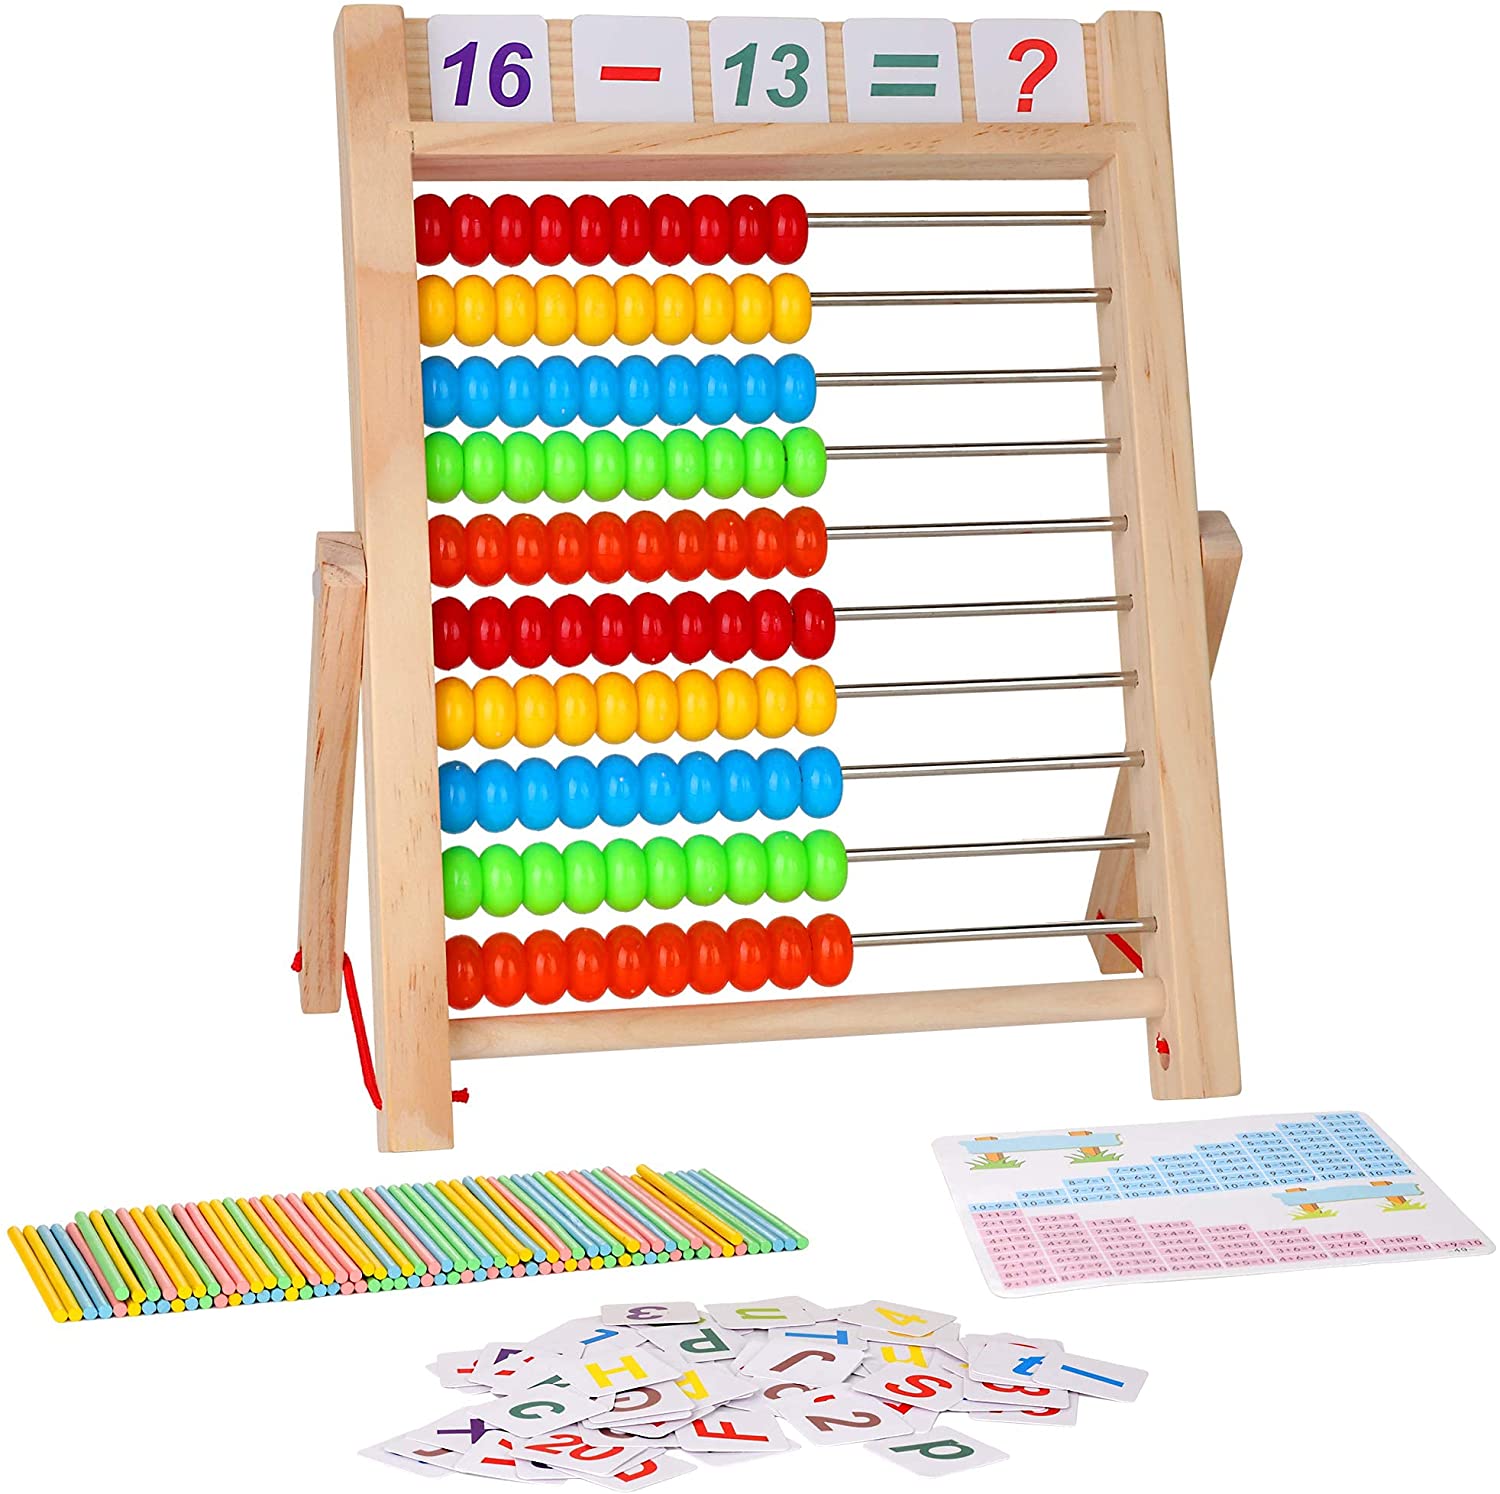 Wooden Abacus 10-row Colorful Beads Preschool Counting Math Education Toy Gift 